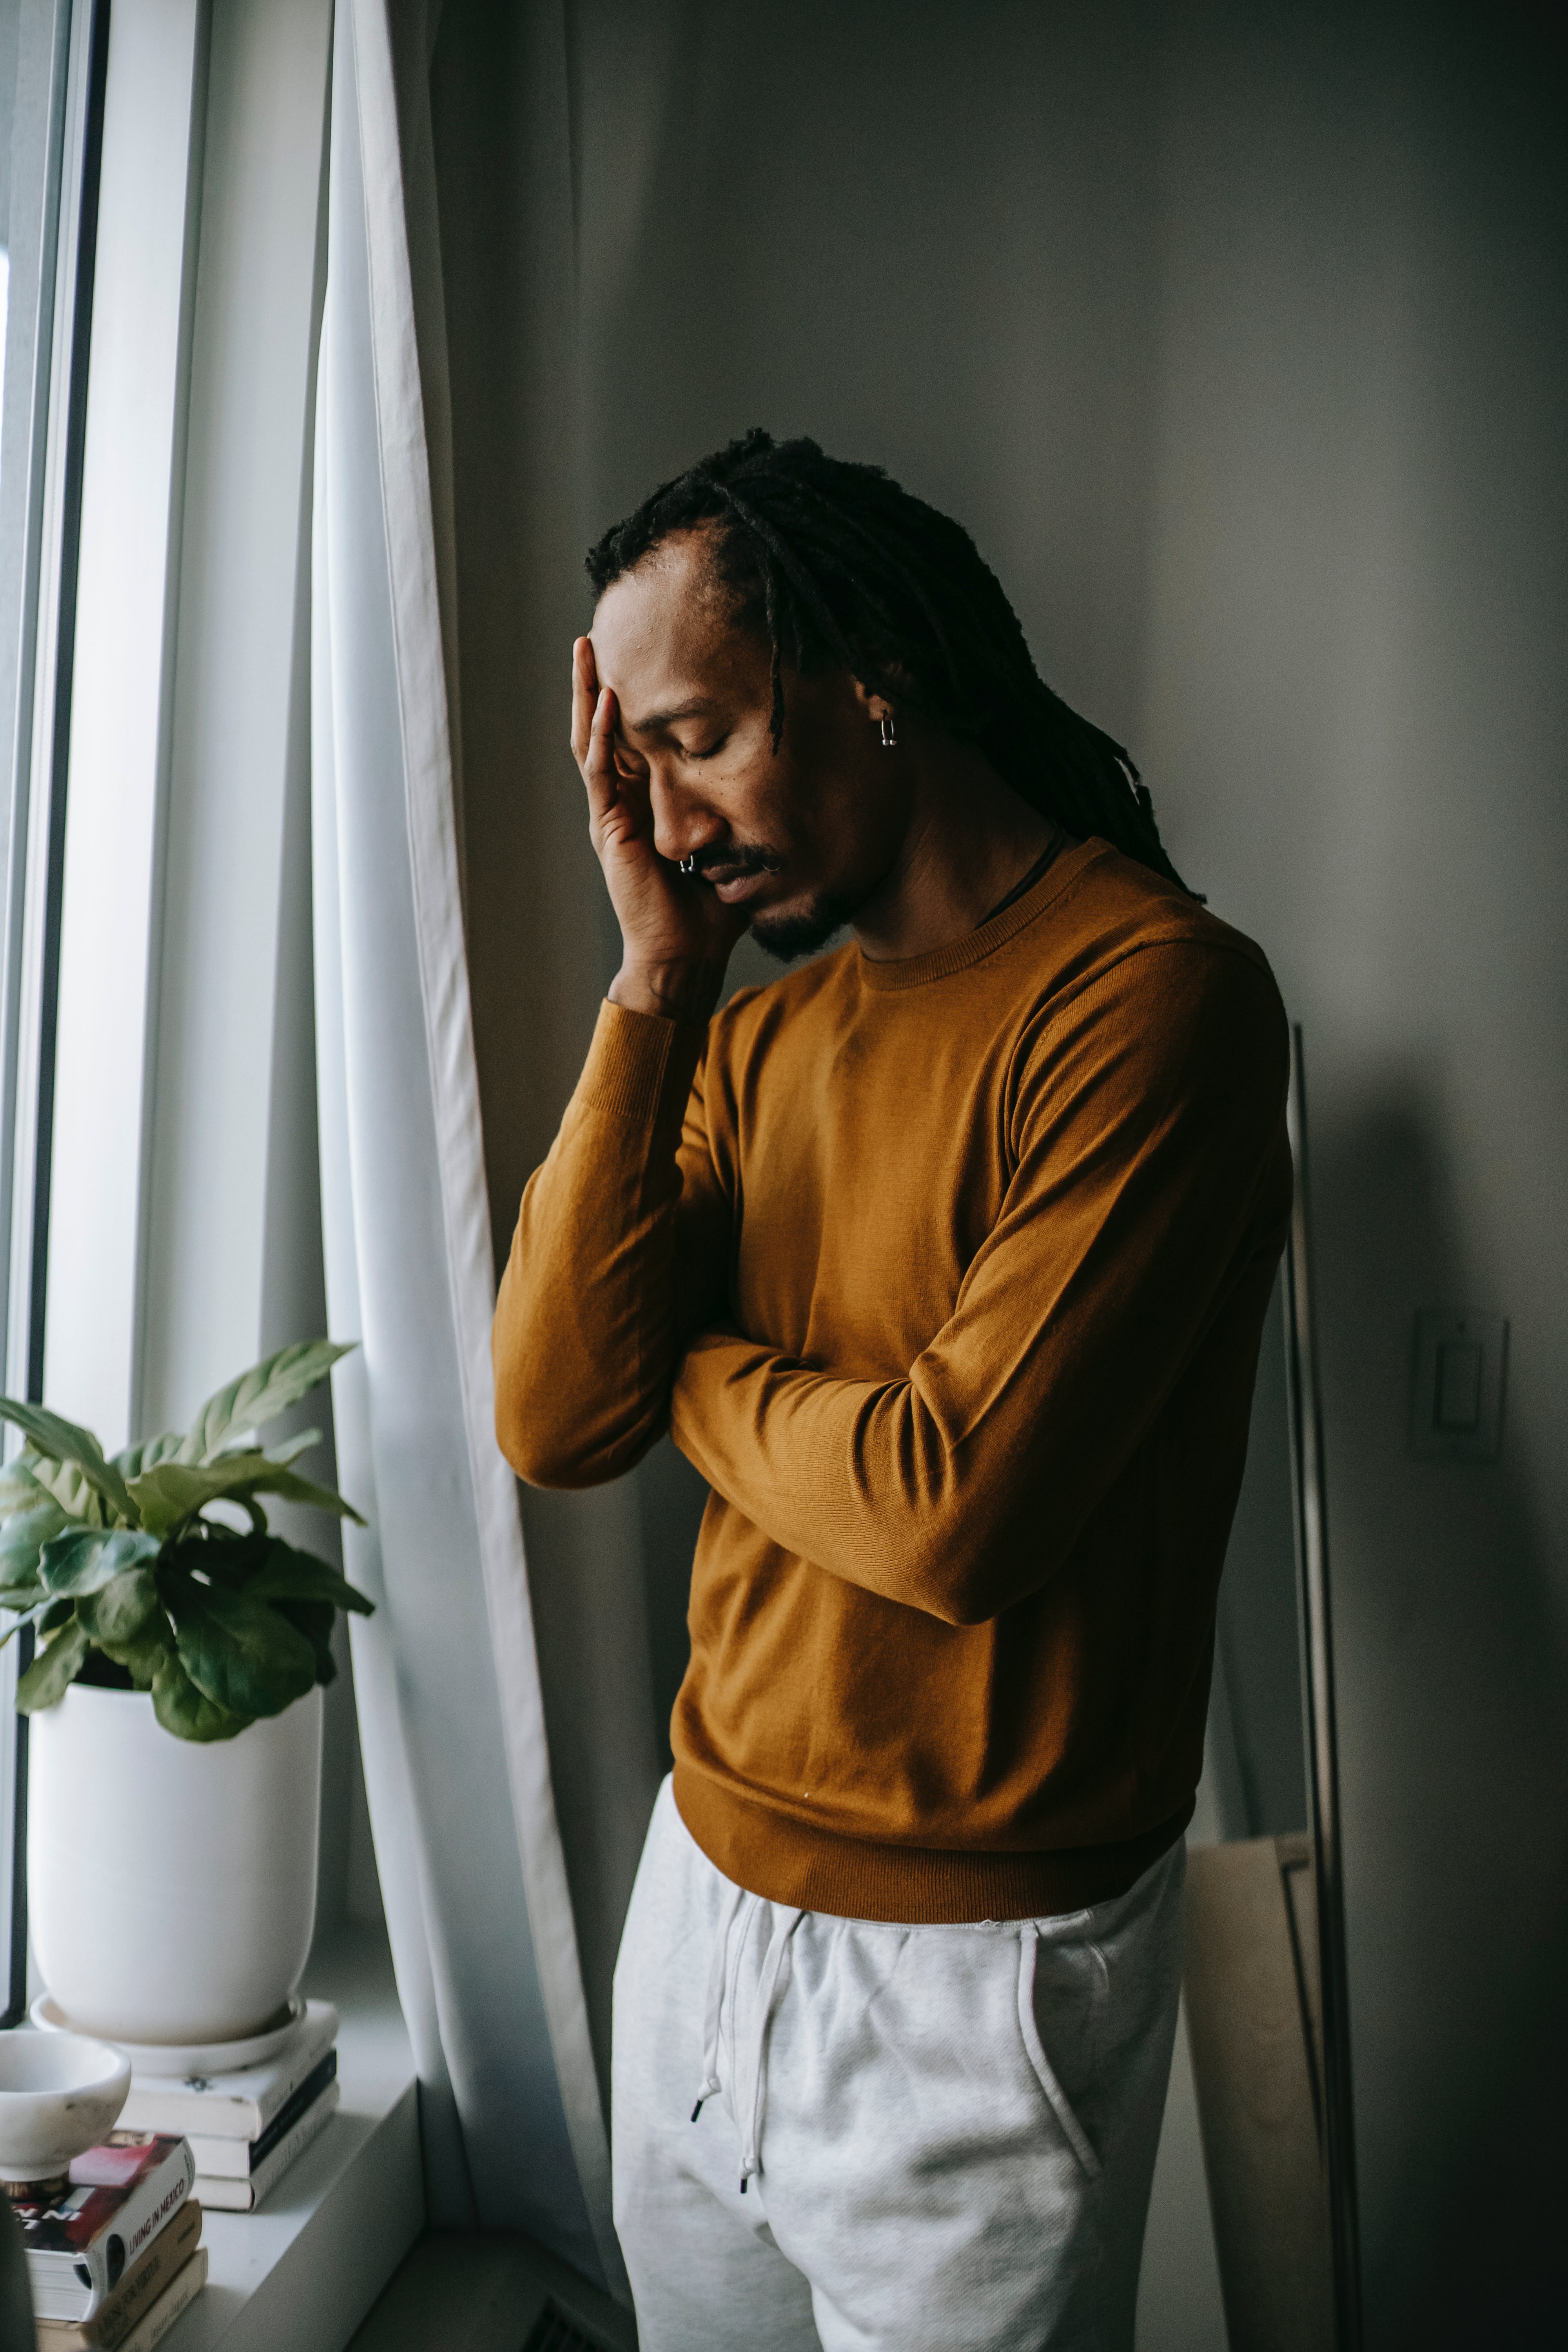 An upset man leaning against a wall covering his face with one hand | Source: Pexels